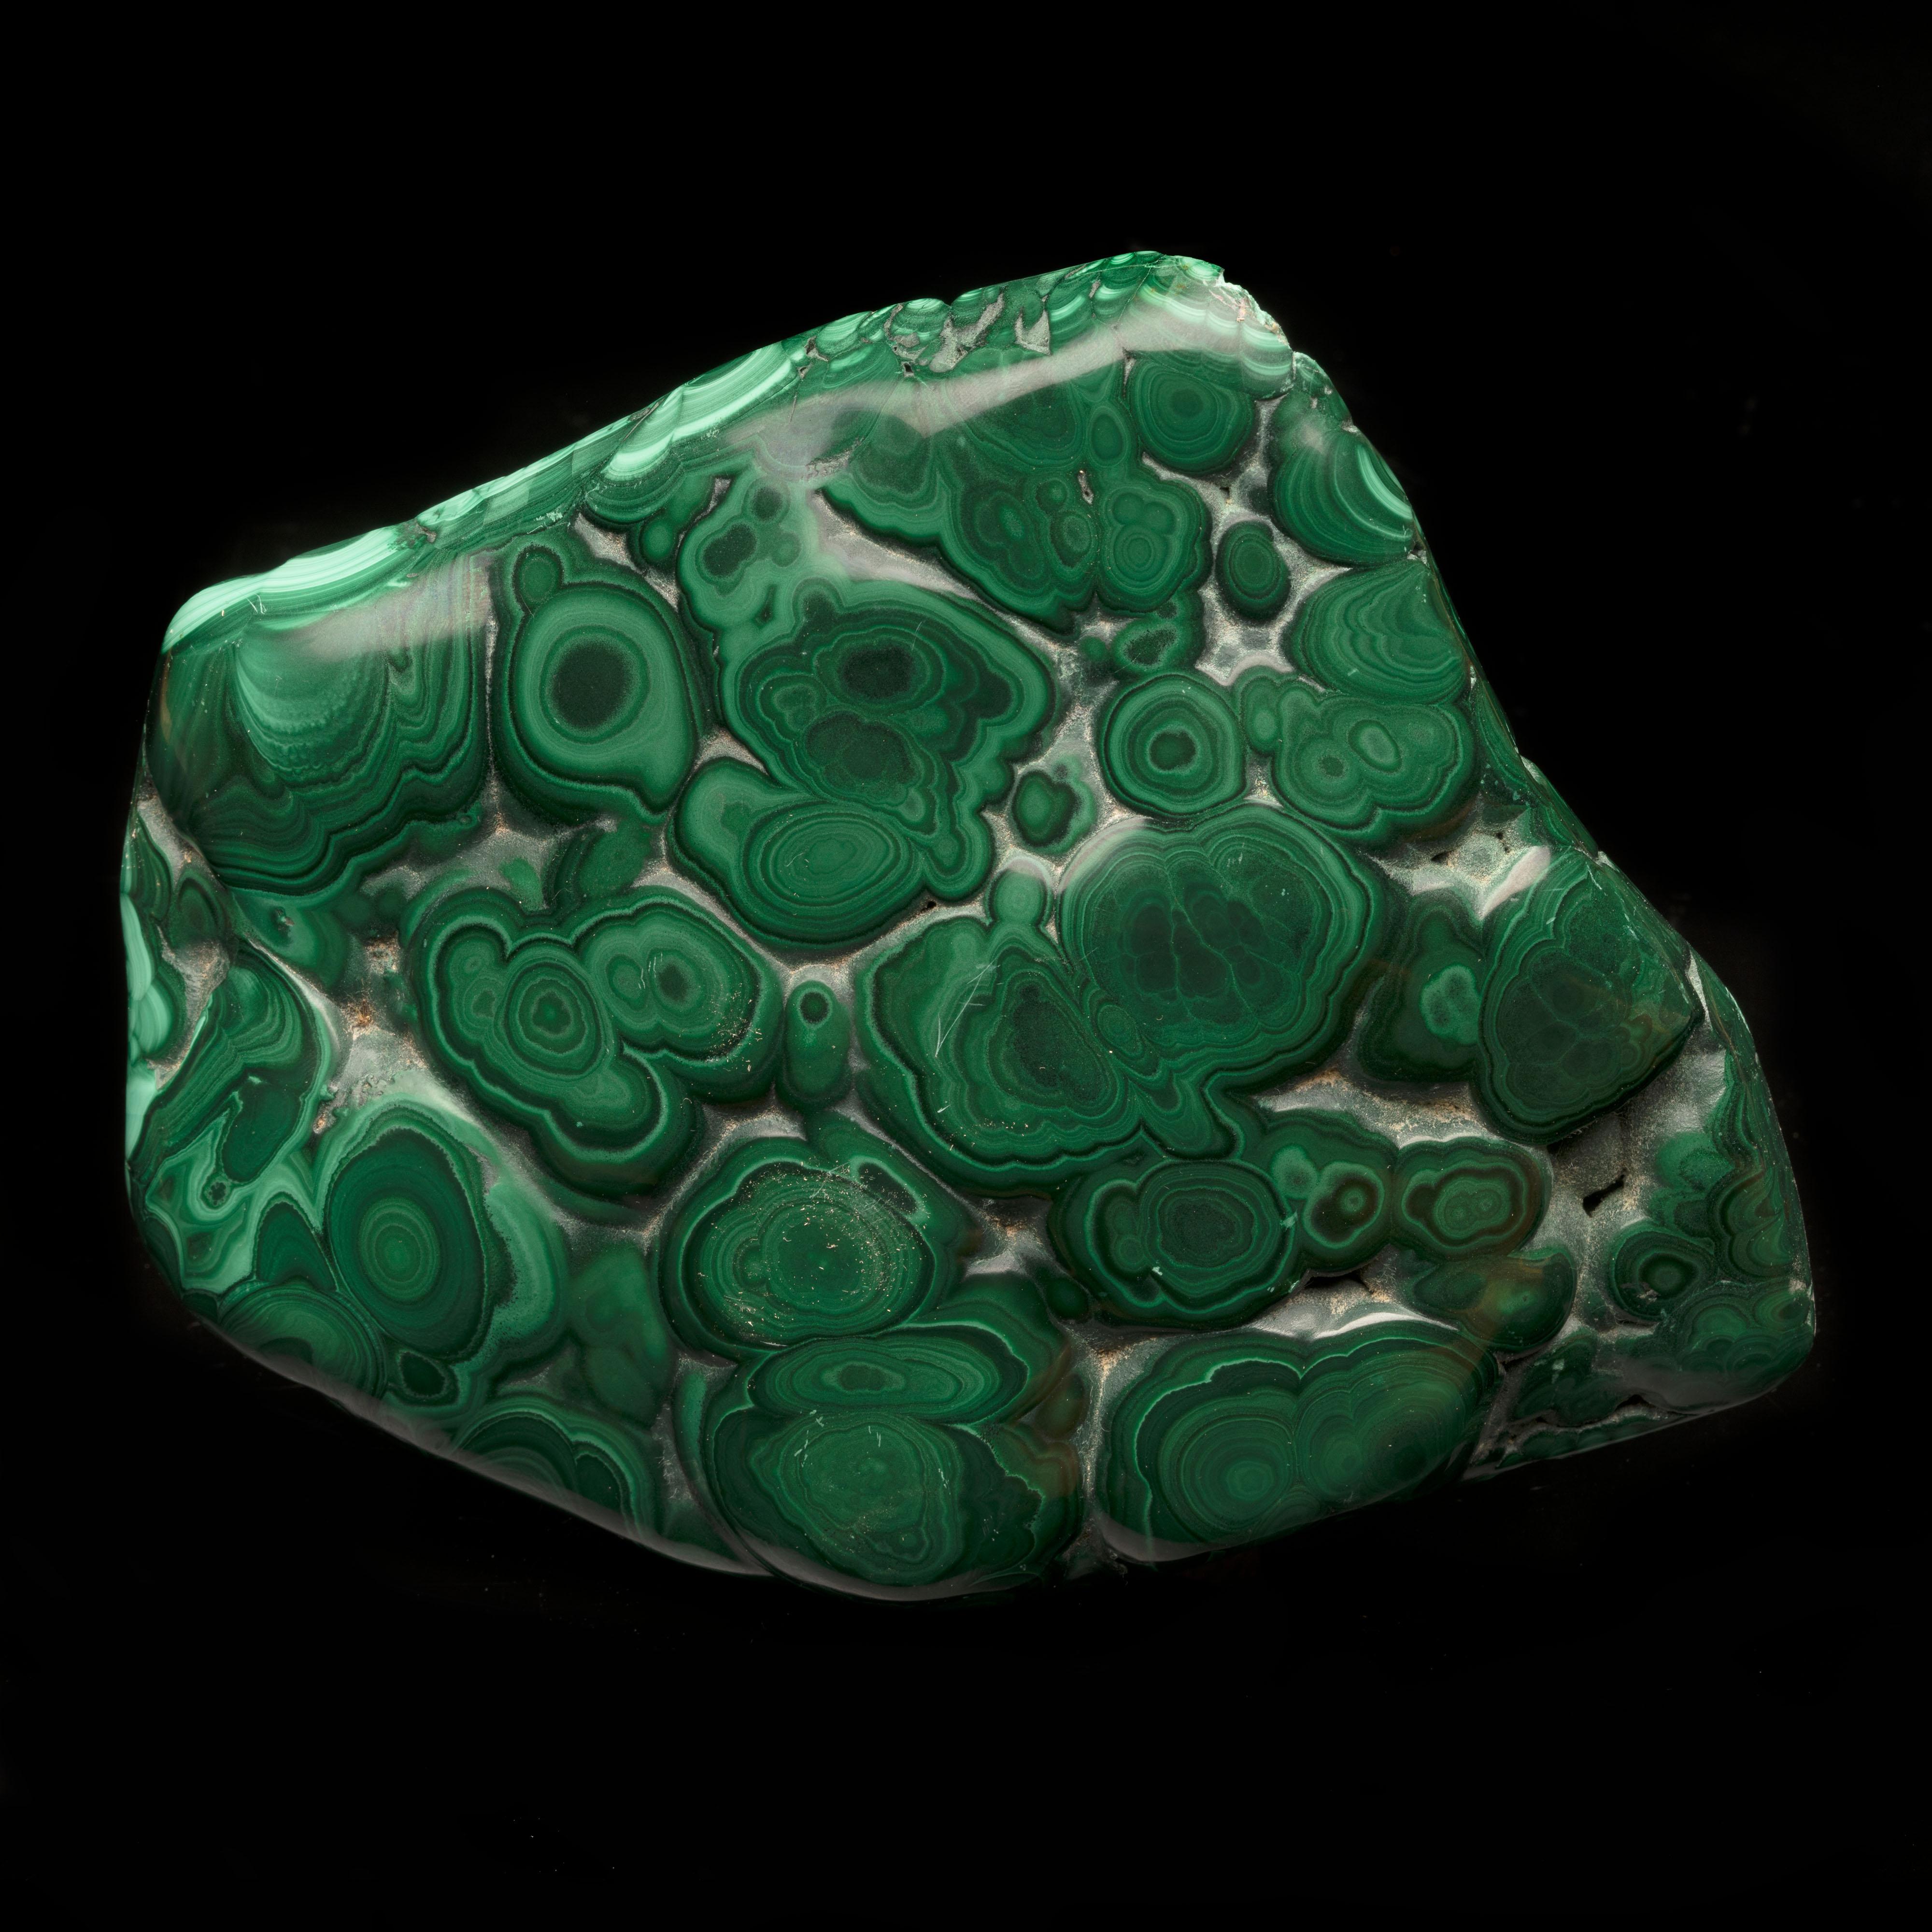 This expertly hand-polished top grade 4 lb malachite freeform from the DRC features excellent color and an abundance of well-defined bullseyes. Malachite is a lusciously hued, bright and dark green banded copper carbonate mineral that often grows